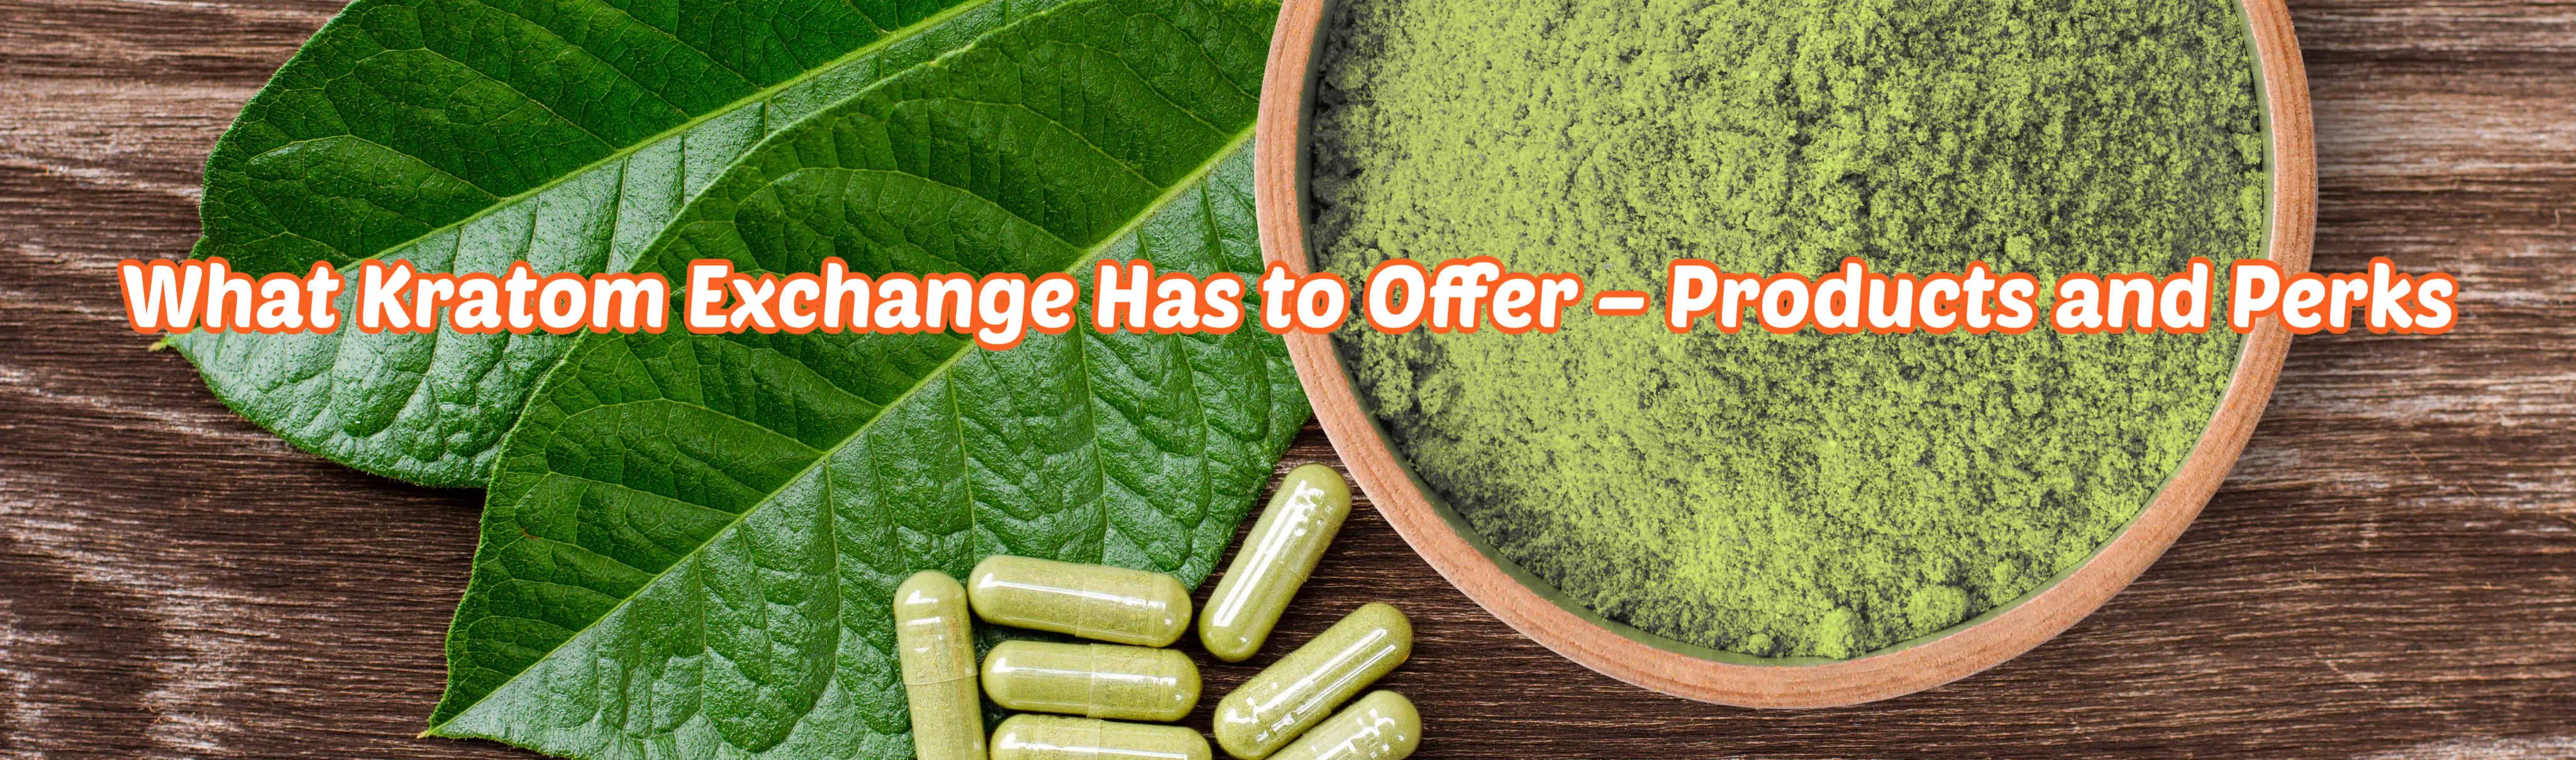 What kratom exchange has to offer - products and perks